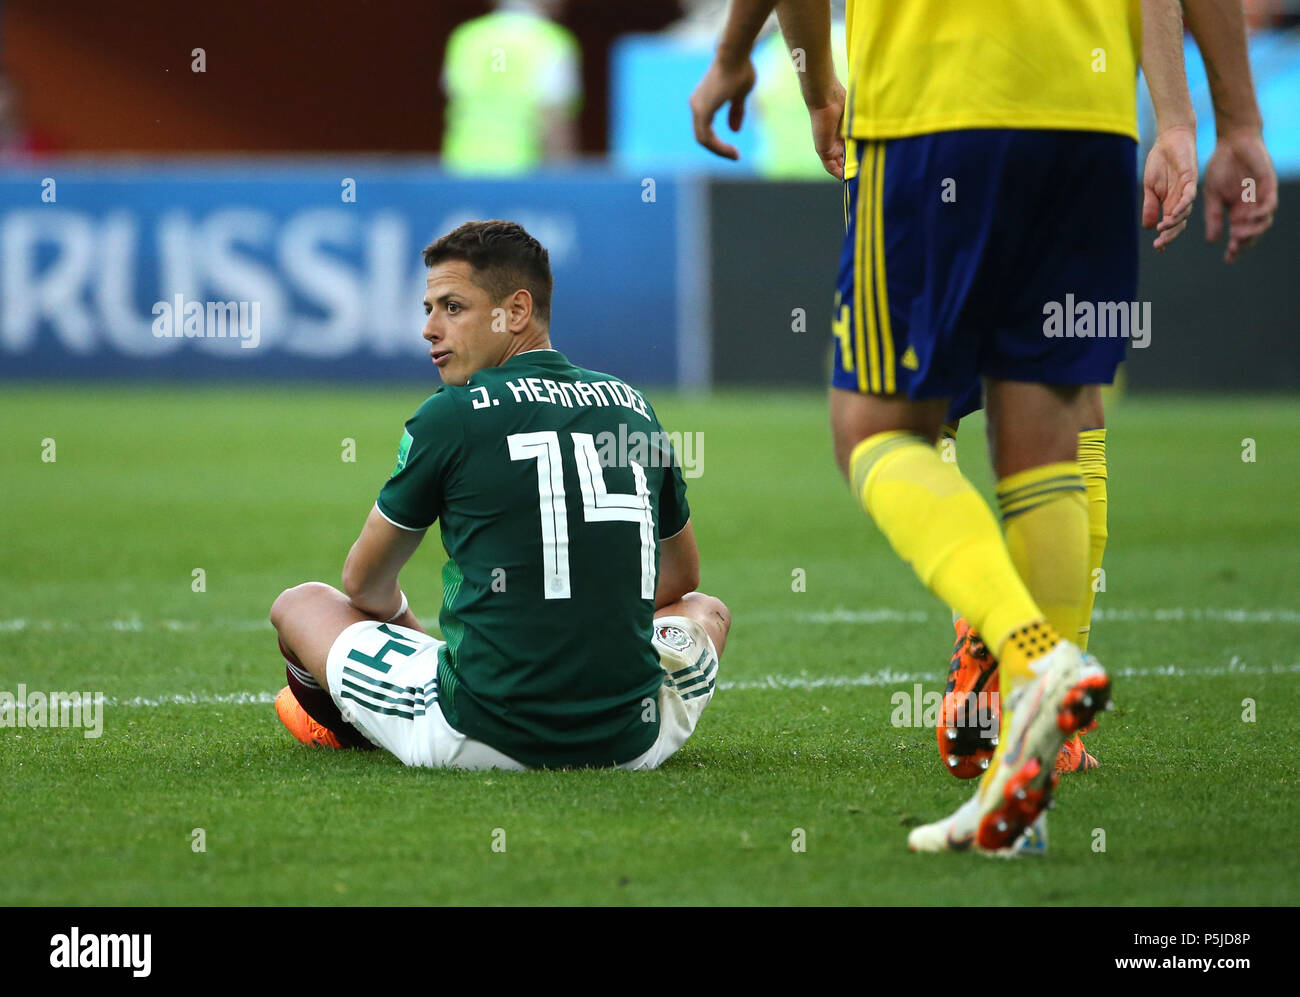 Yekaterinburg, Russia. 27th June, 2018. Javier Hernandez of Mexico reacts during the 2018 FIFA World Cup Group F match between Mexico and Sweden in Yekaterinburg, Russia, June 27, 2018. Credit: Li Ming/Xinhua/Alamy Live News Stock Photo